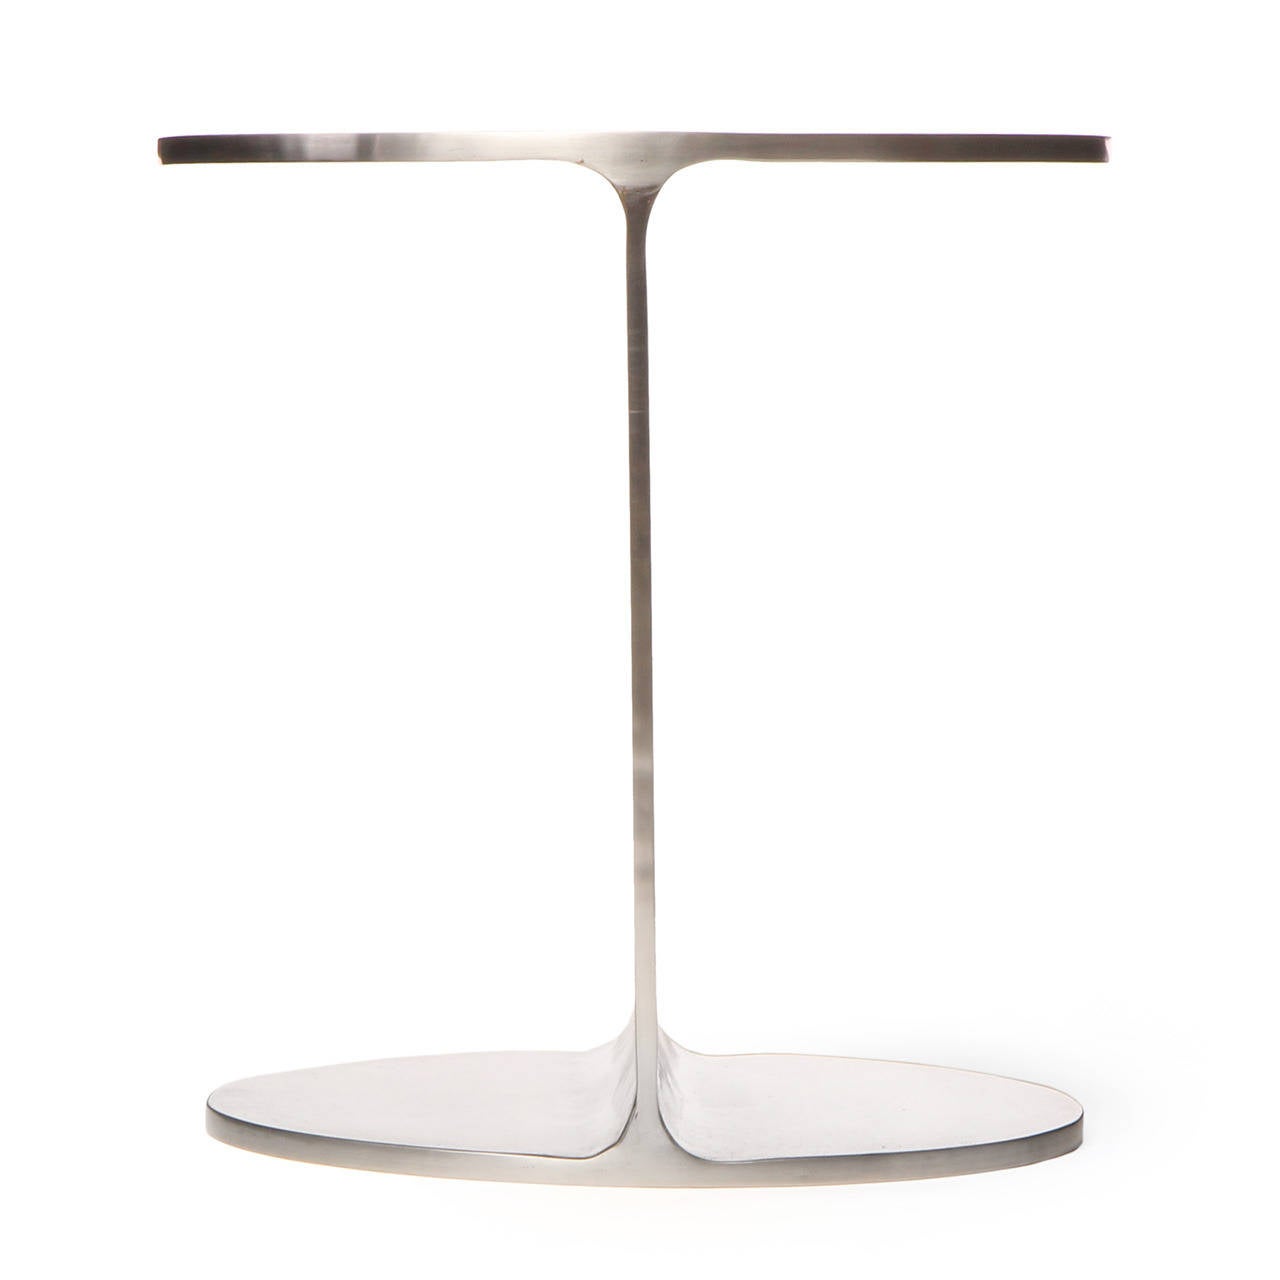 A superbly rendered and sublimely minimalist pedestal, side table or coffee table in the form of a truncated I-beam fashioned of hot rolled and welded steel with a polished natural grain surface. This versatile table can be left bare or topped with